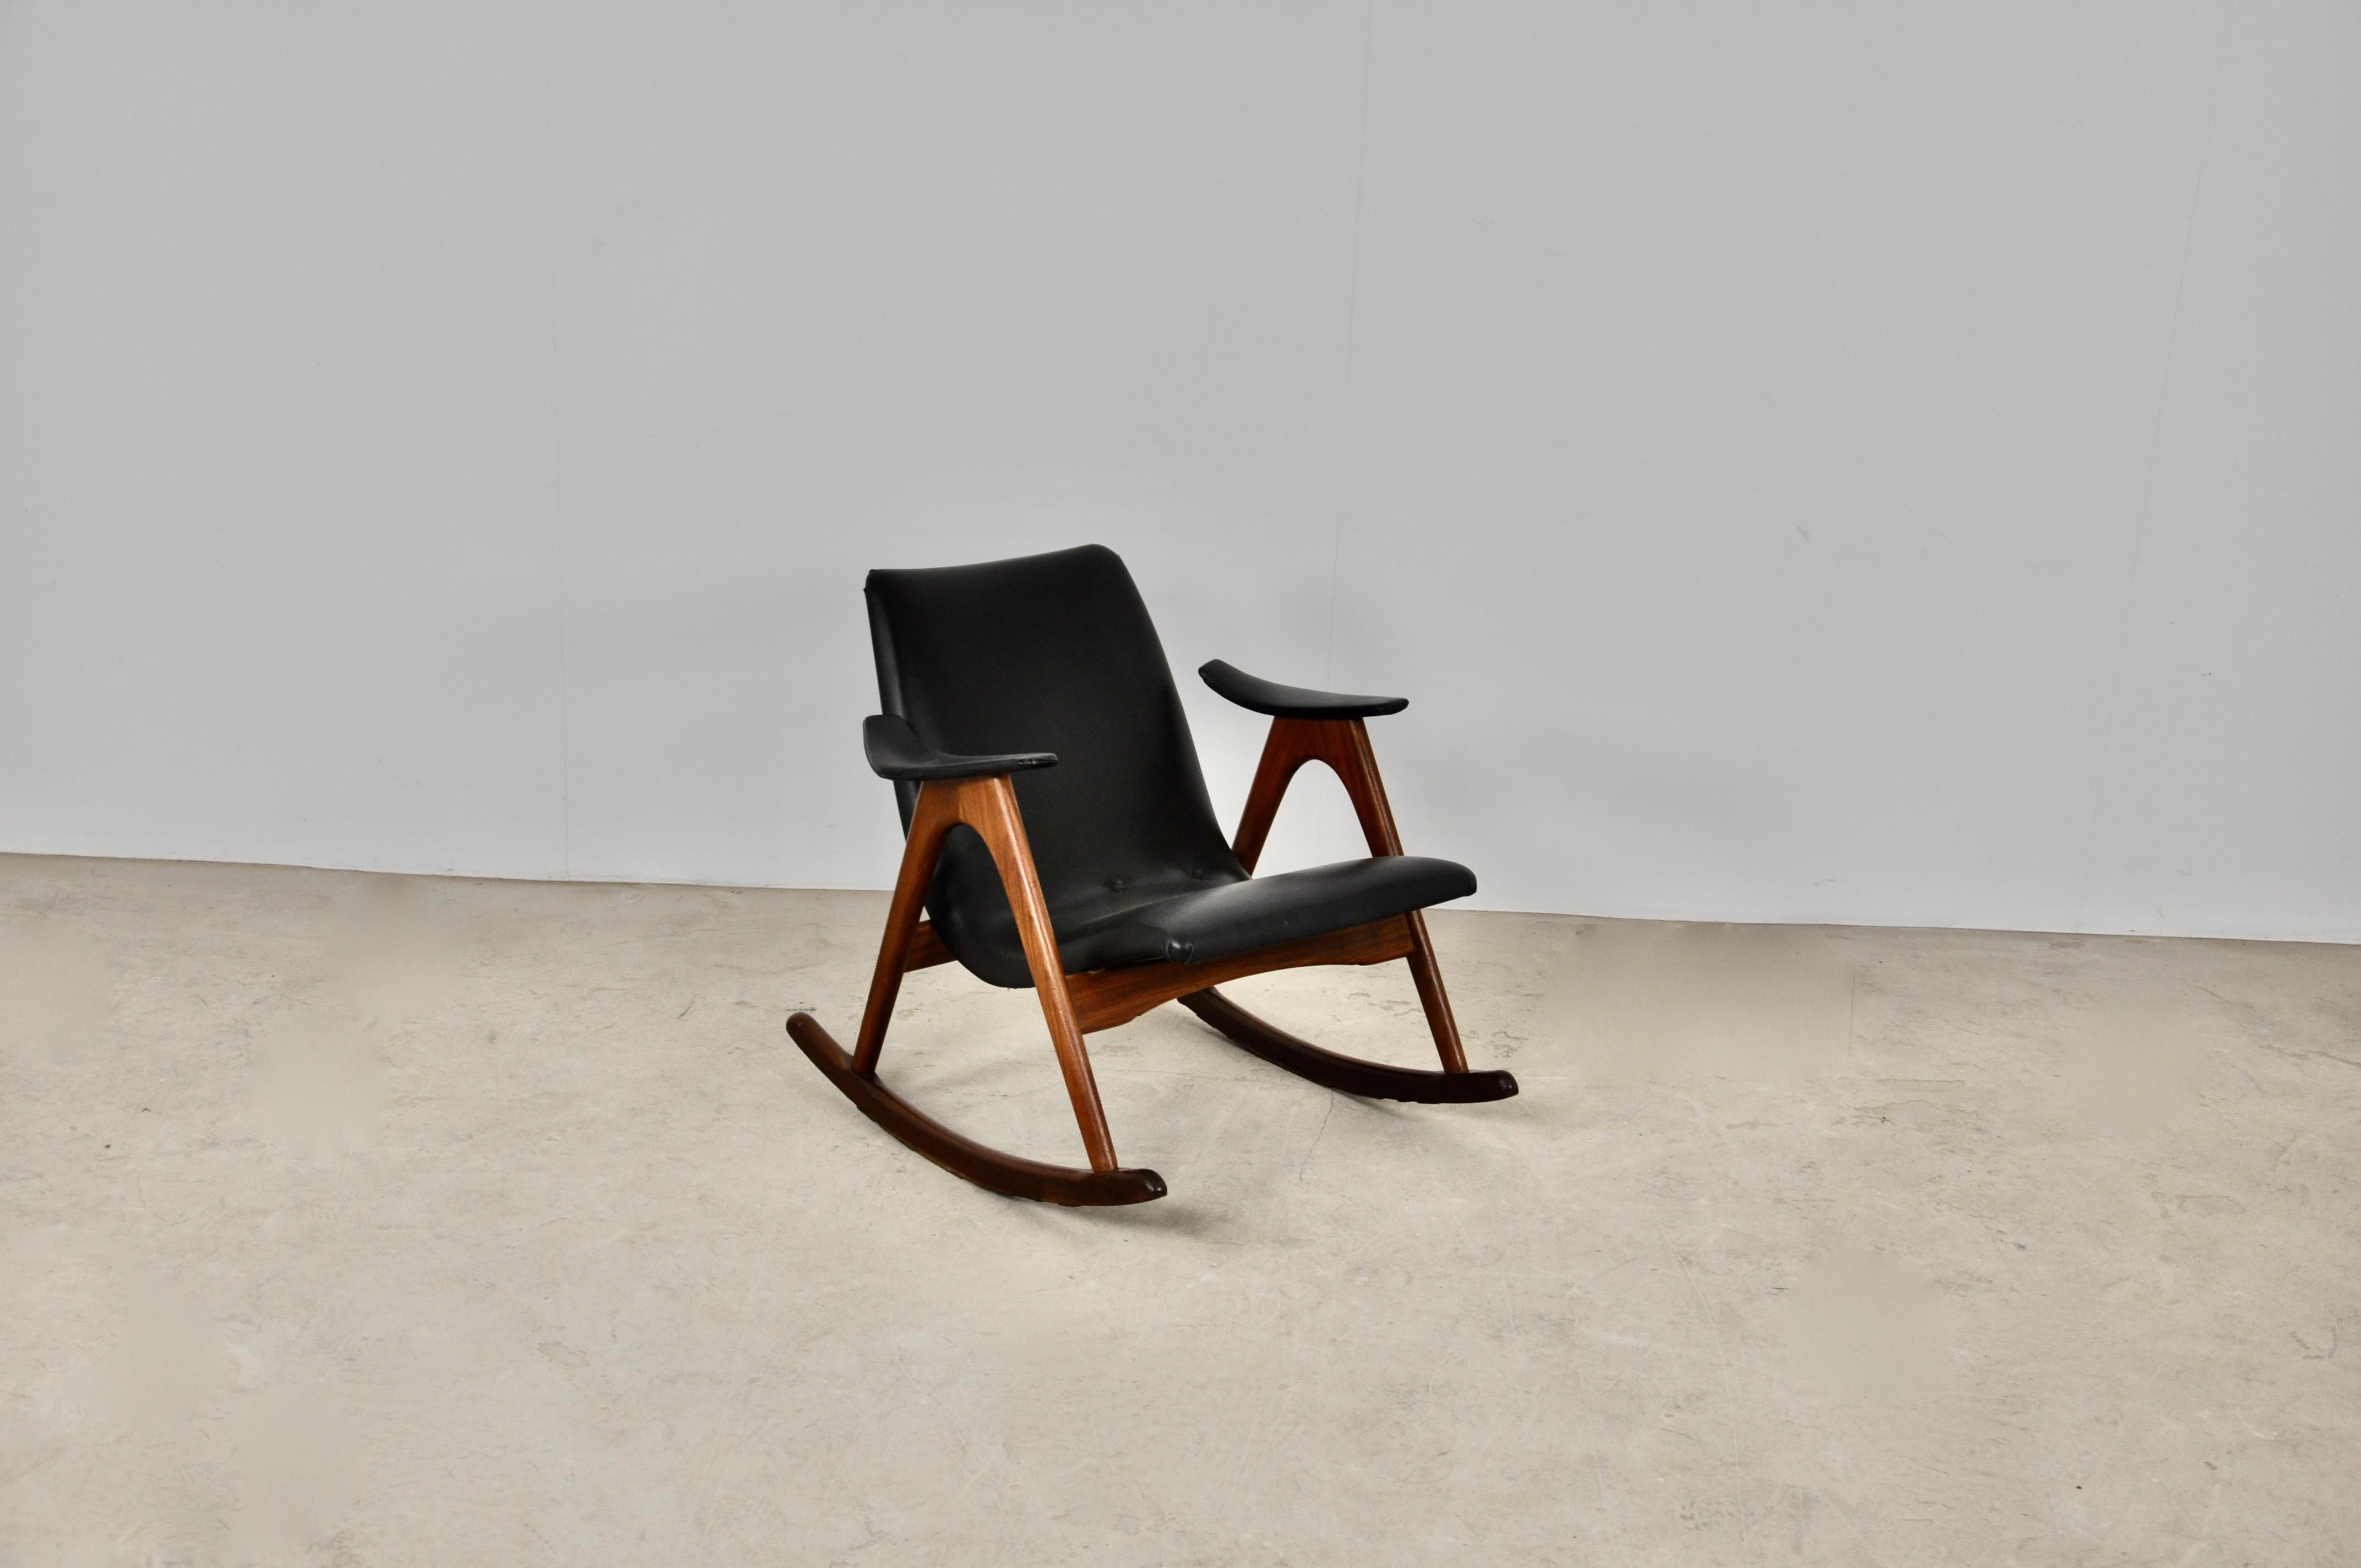 Rocking chair wood color black. Wear due to time and age of rocking chair.